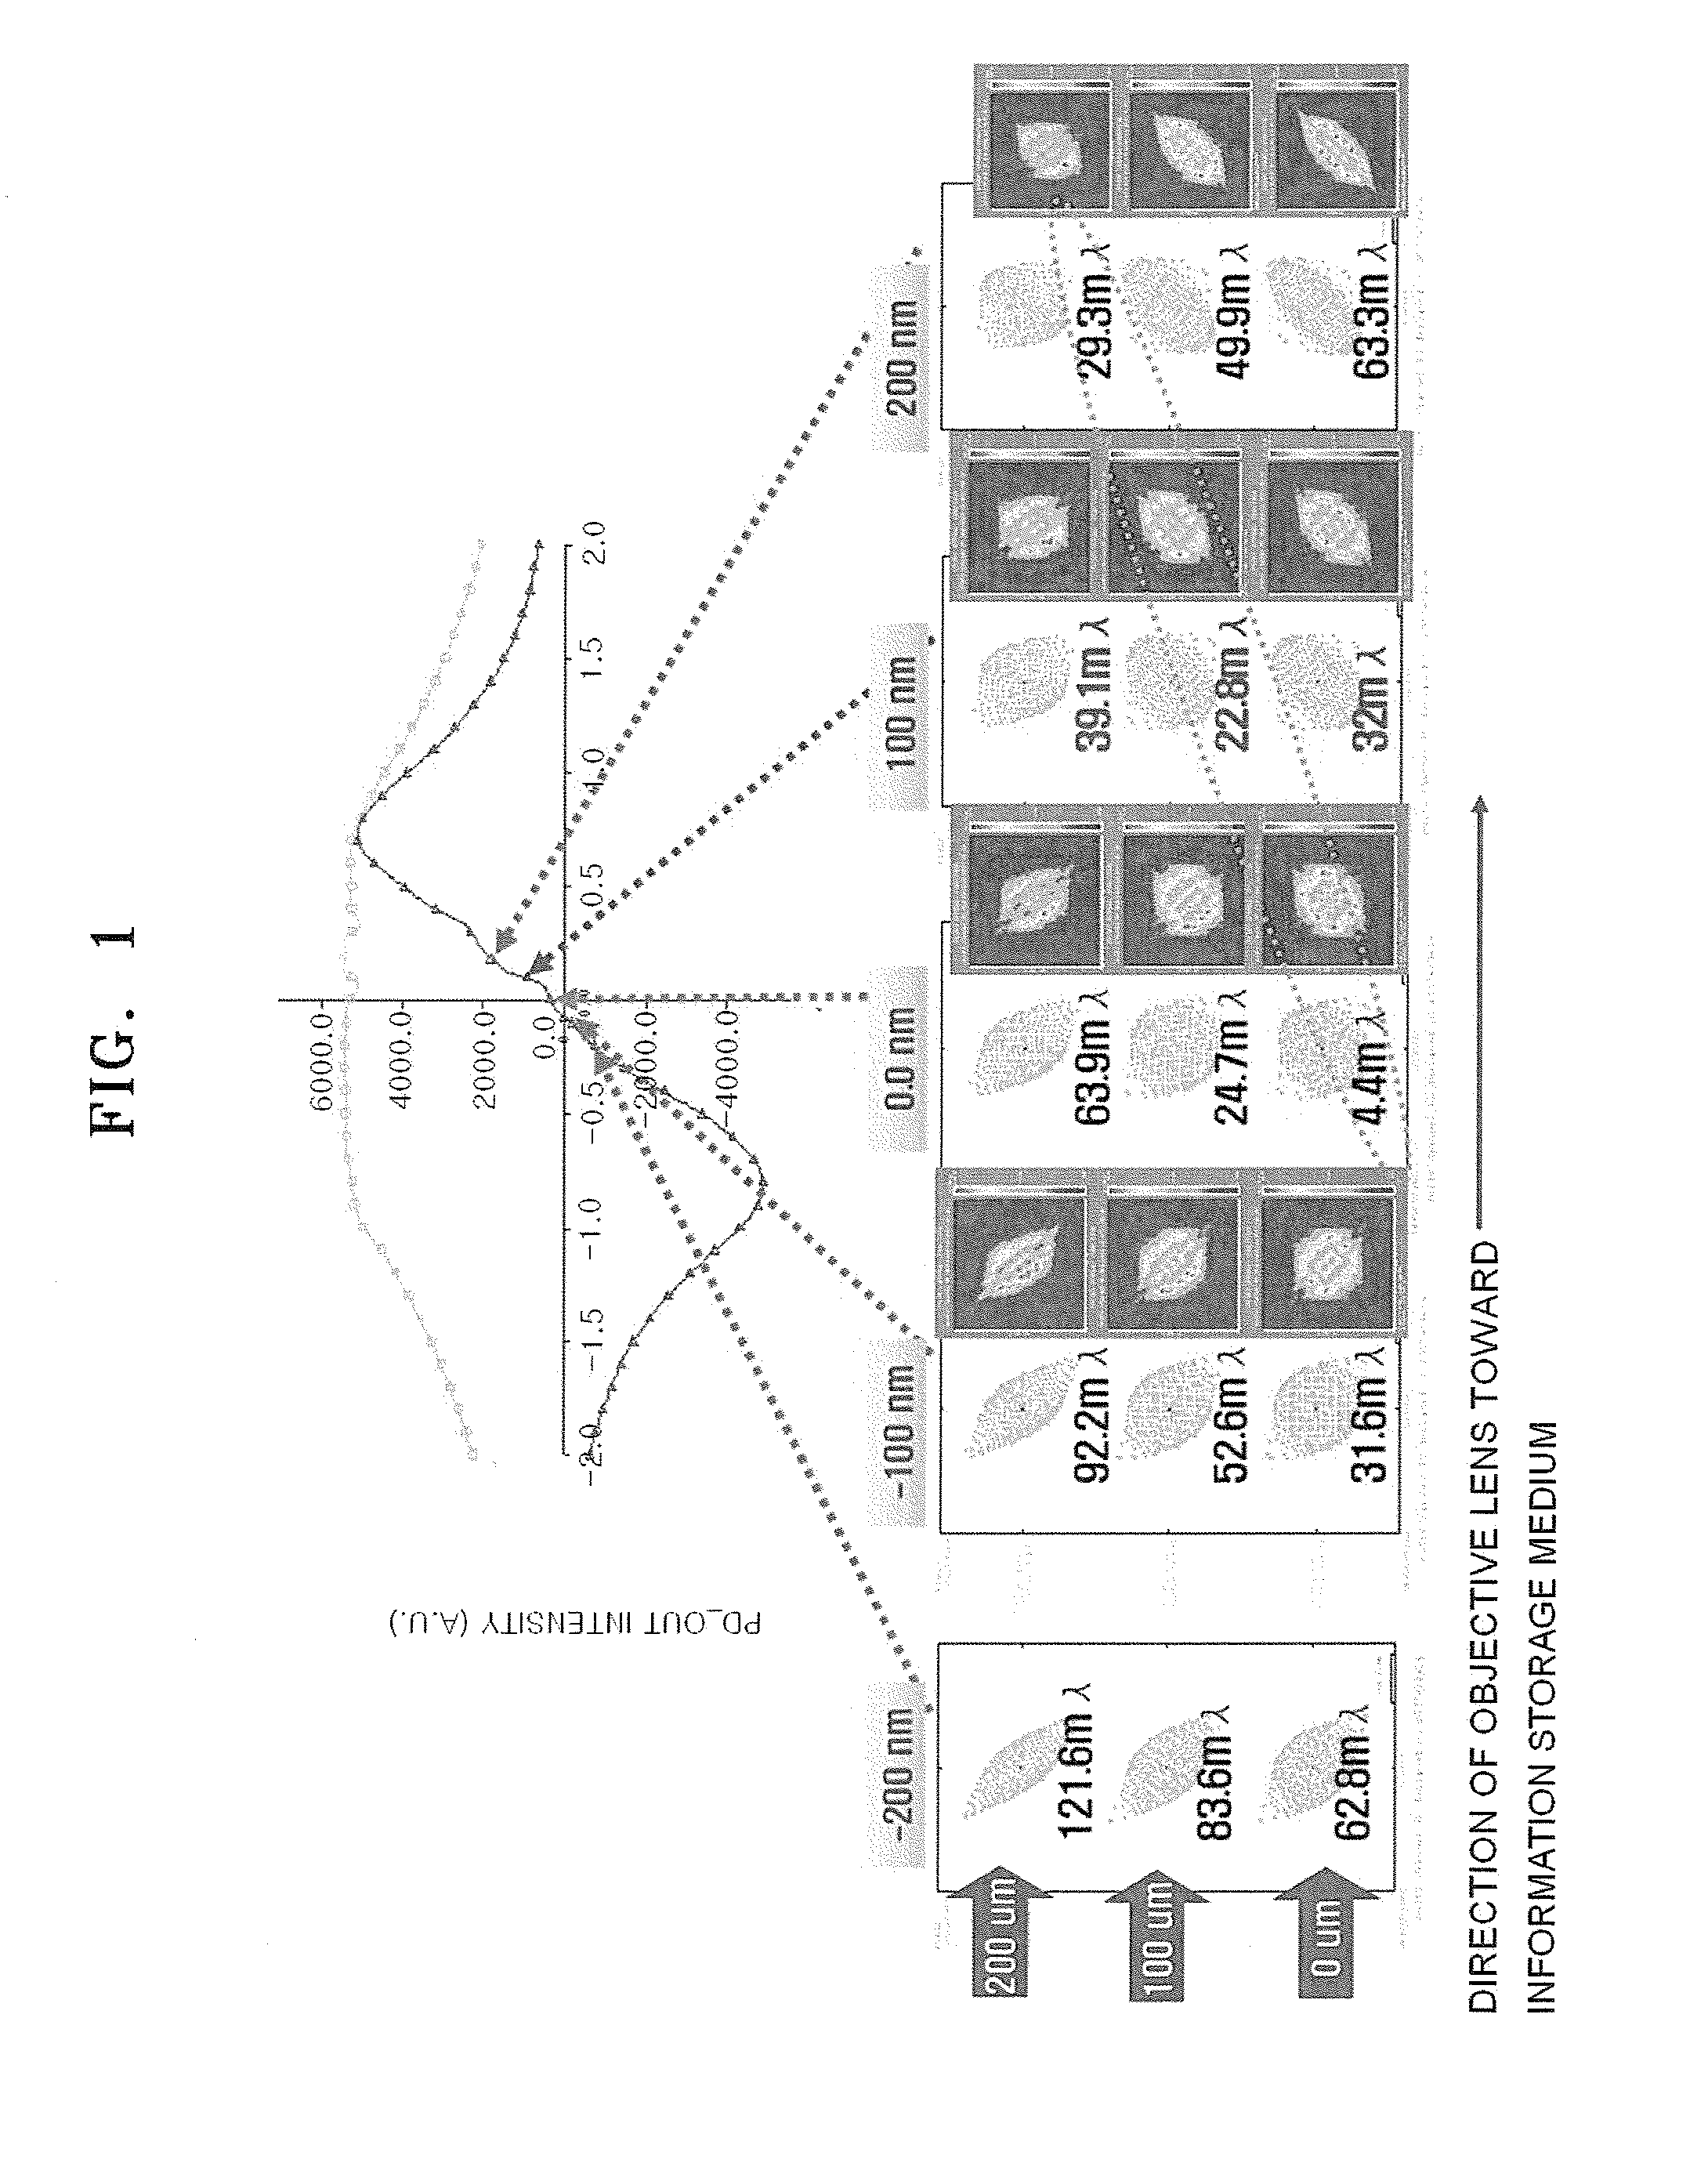 Multi-channel optical pickup and optical recording/reproducing apparatus employing the same